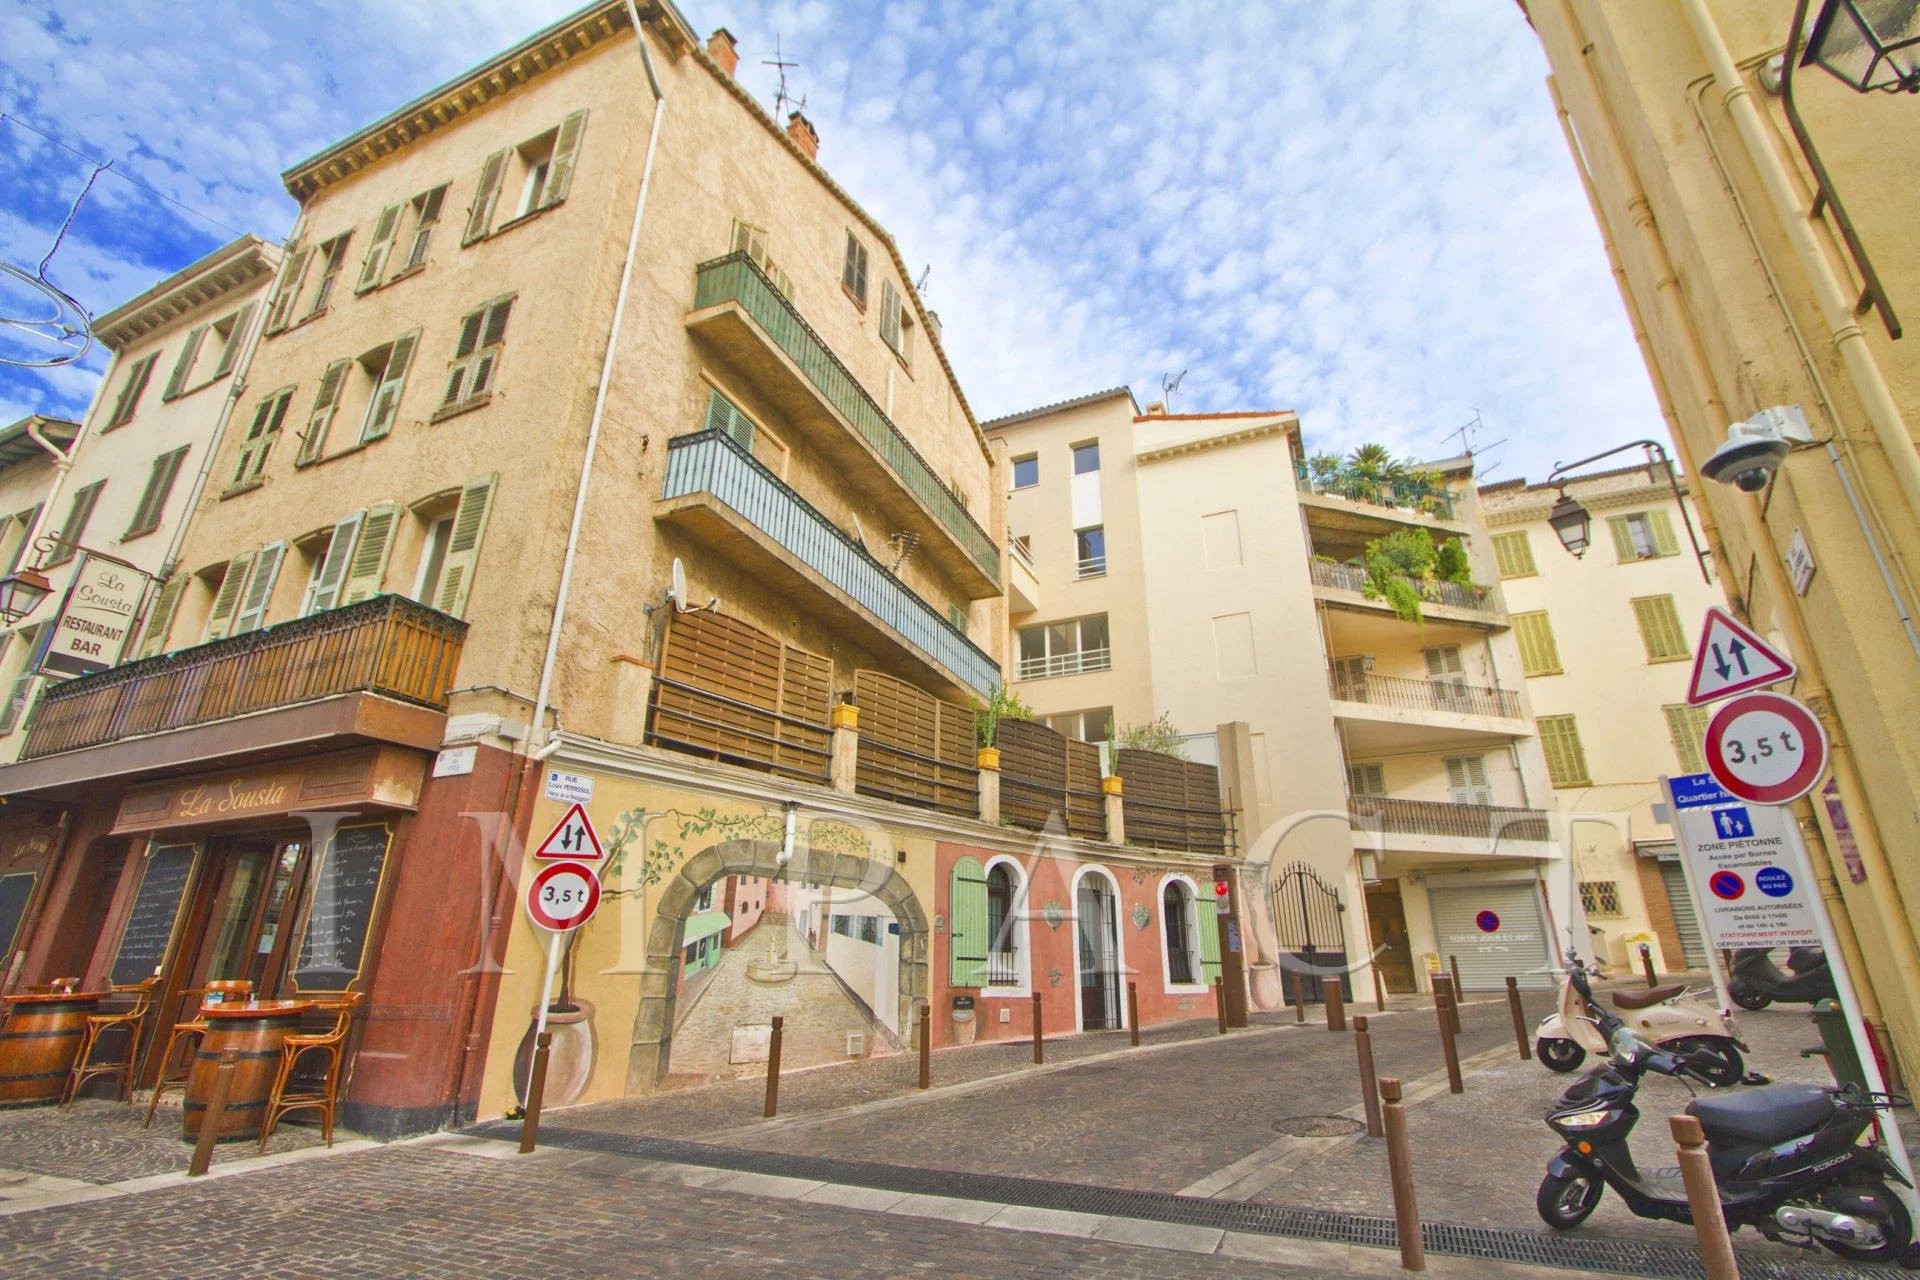 BEAUTIFULLY FULLY RENOVATED BUILDING FOR RENT, WALKING DISTANCE TO THE PALAIS DES FESTIVALS, CANNES